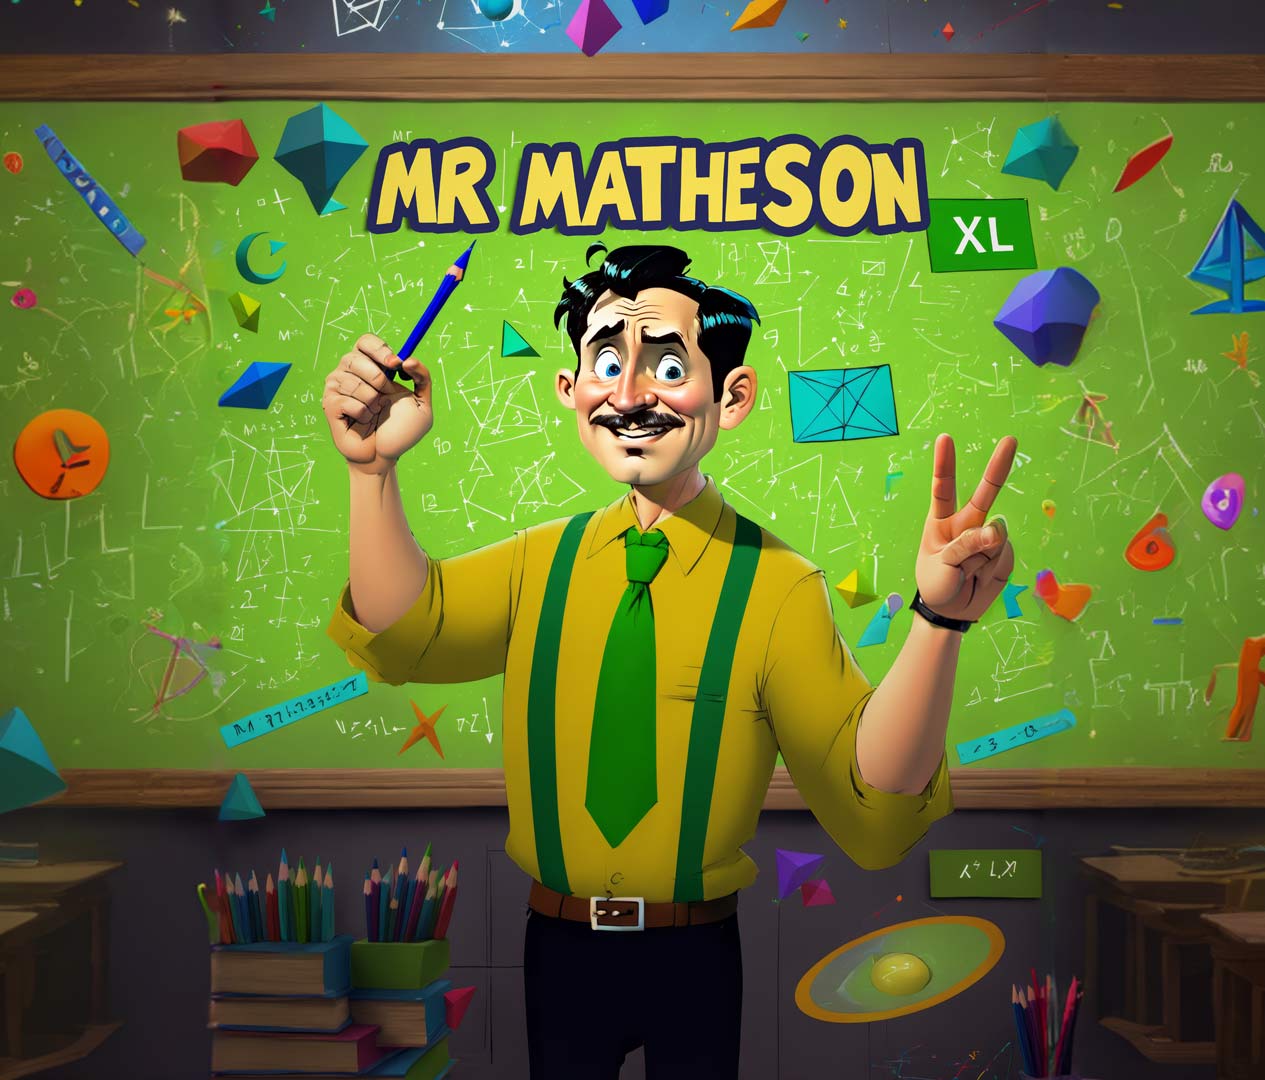 Mr. Bill Matheson is infused into the history of Everly Heights. A former math teacher, Bill leveraged his power as a leader on the Everly Heights Arts Board to buy up a significant chunk on the town. These days, he's serving up drinks at a pub in downtown Everly Heights.